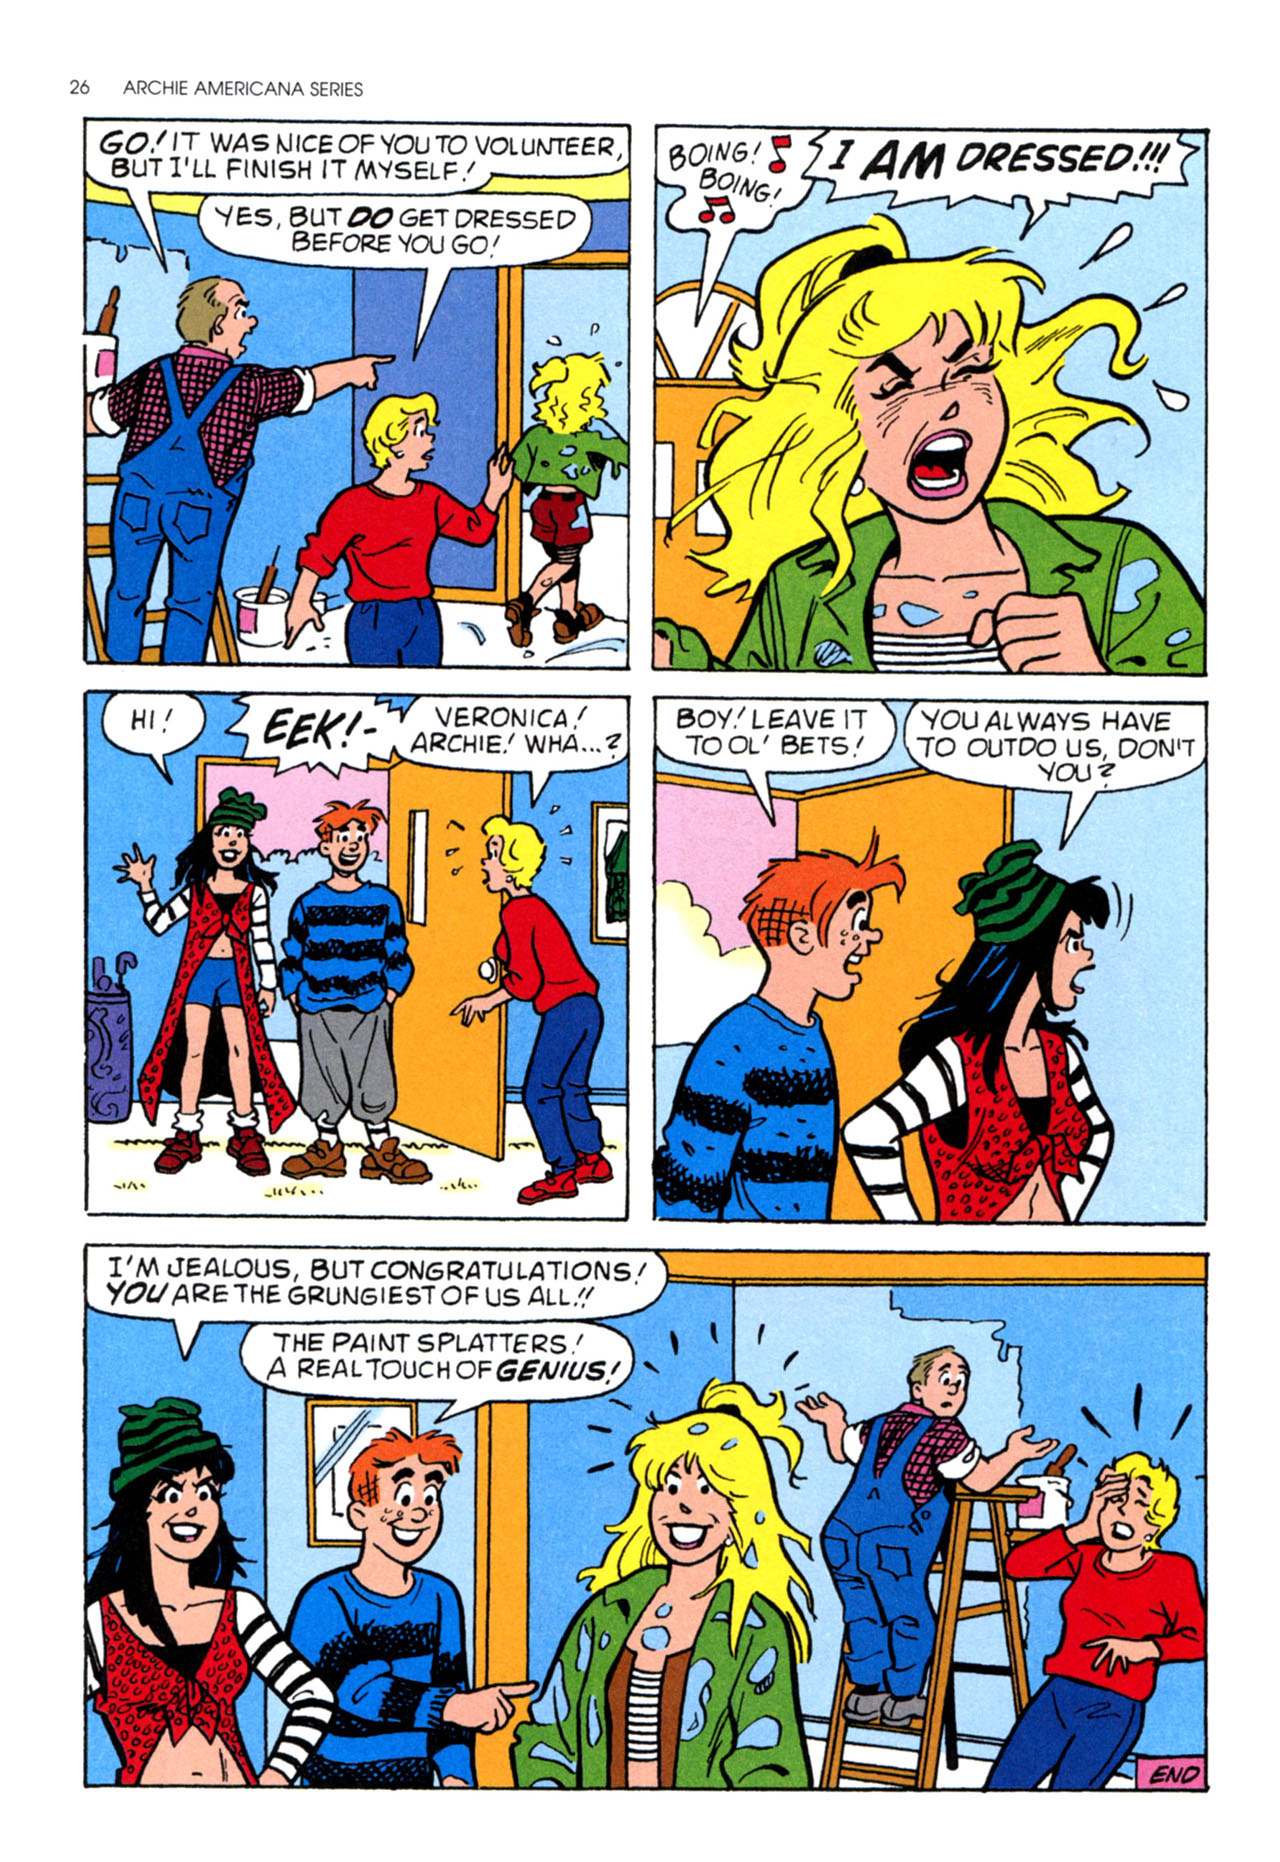 Read online Archie Americana Series comic -  Issue # TPB 12 - 28